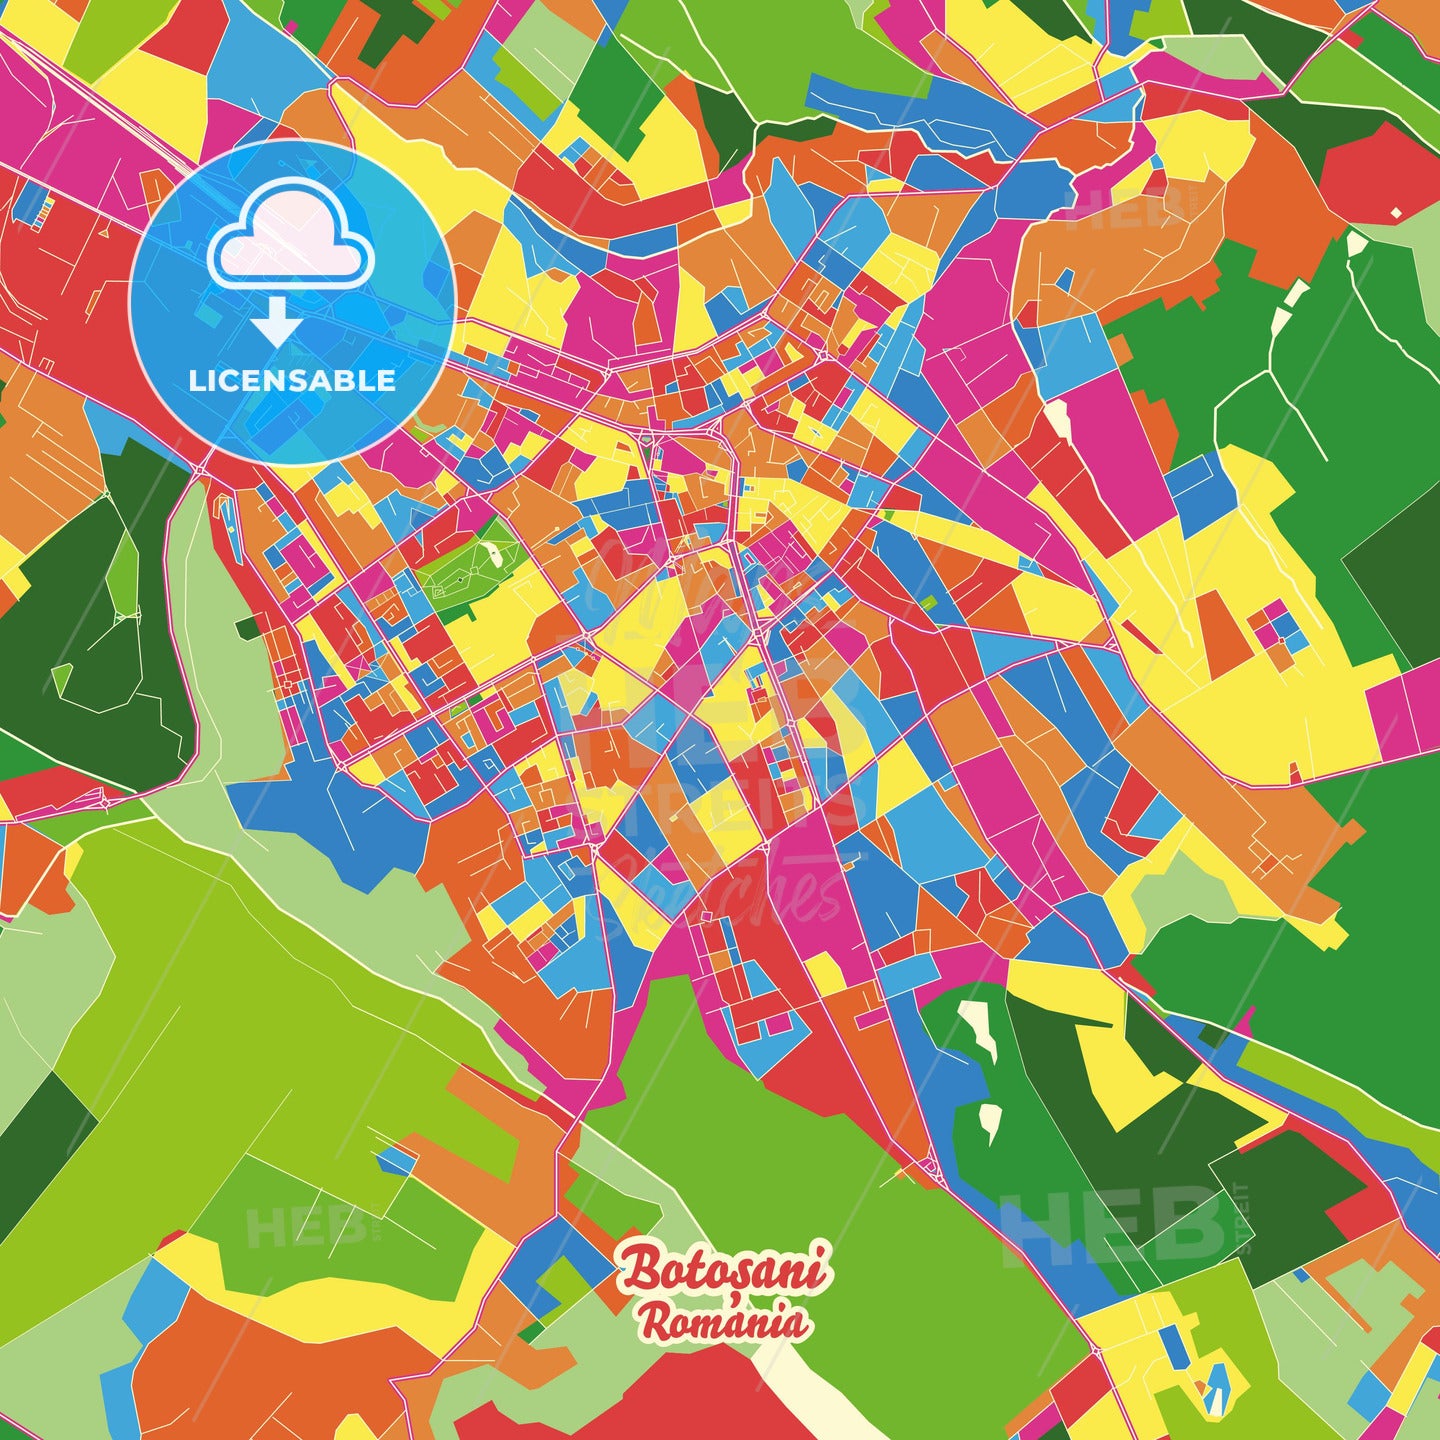 Botoșani, Romania Crazy Colorful Street Map Poster Template - HEBSTREITS Sketches